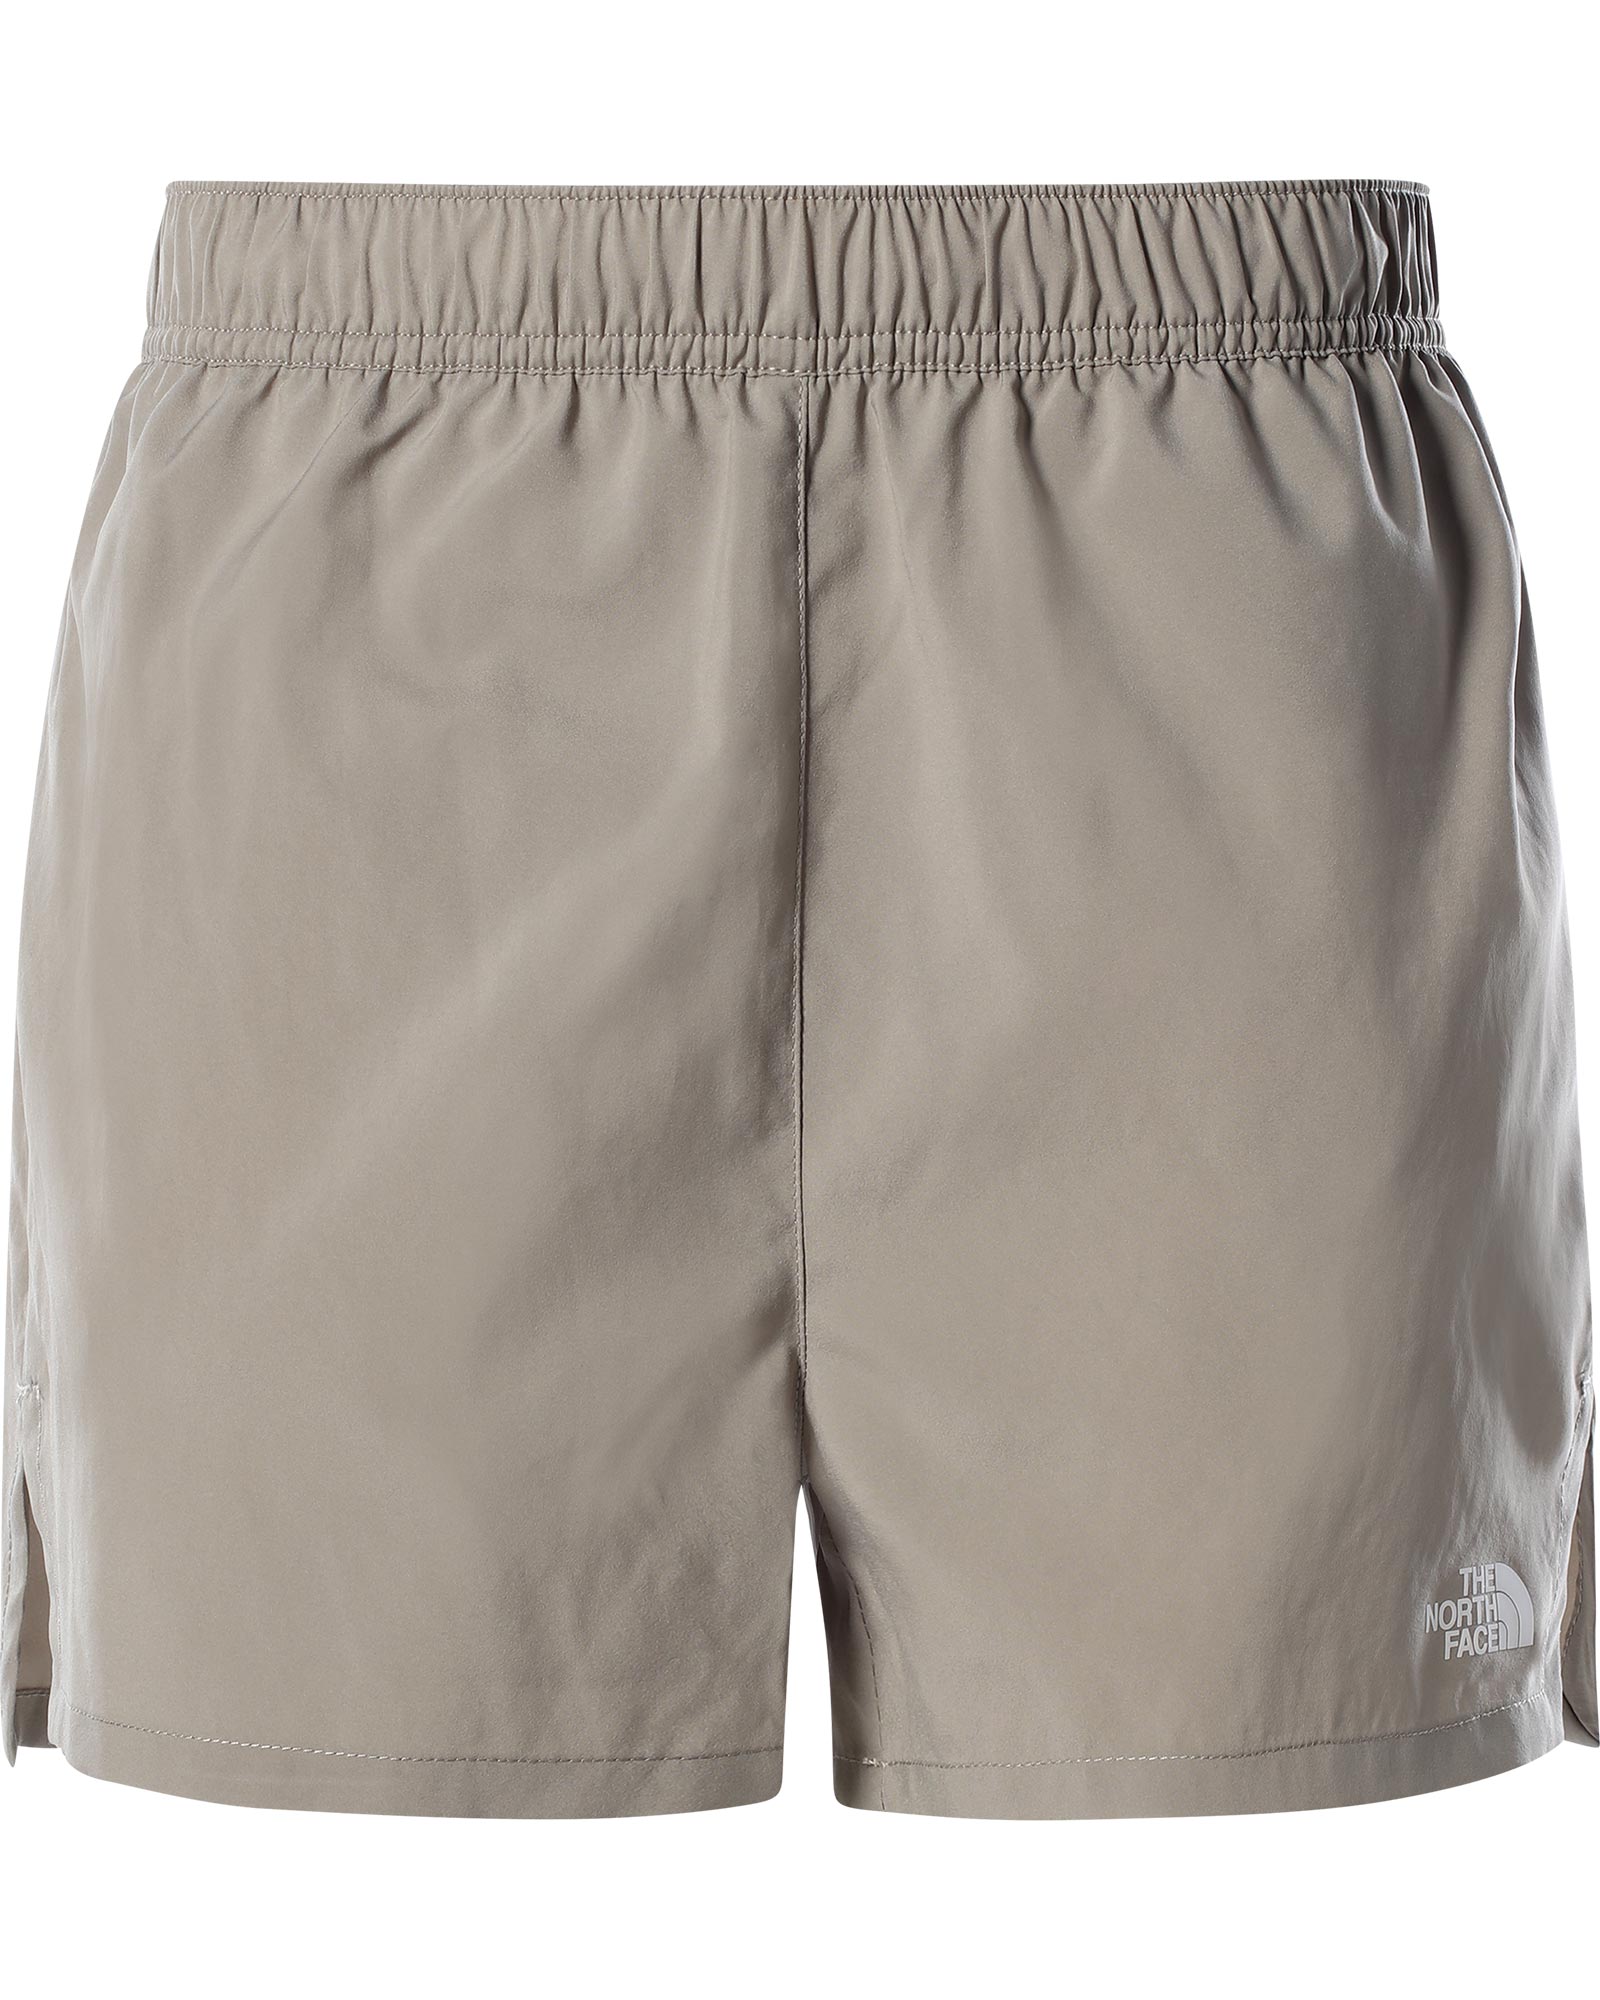 The North Face Movmynt Women’s Shorts - Mineral Grey XL